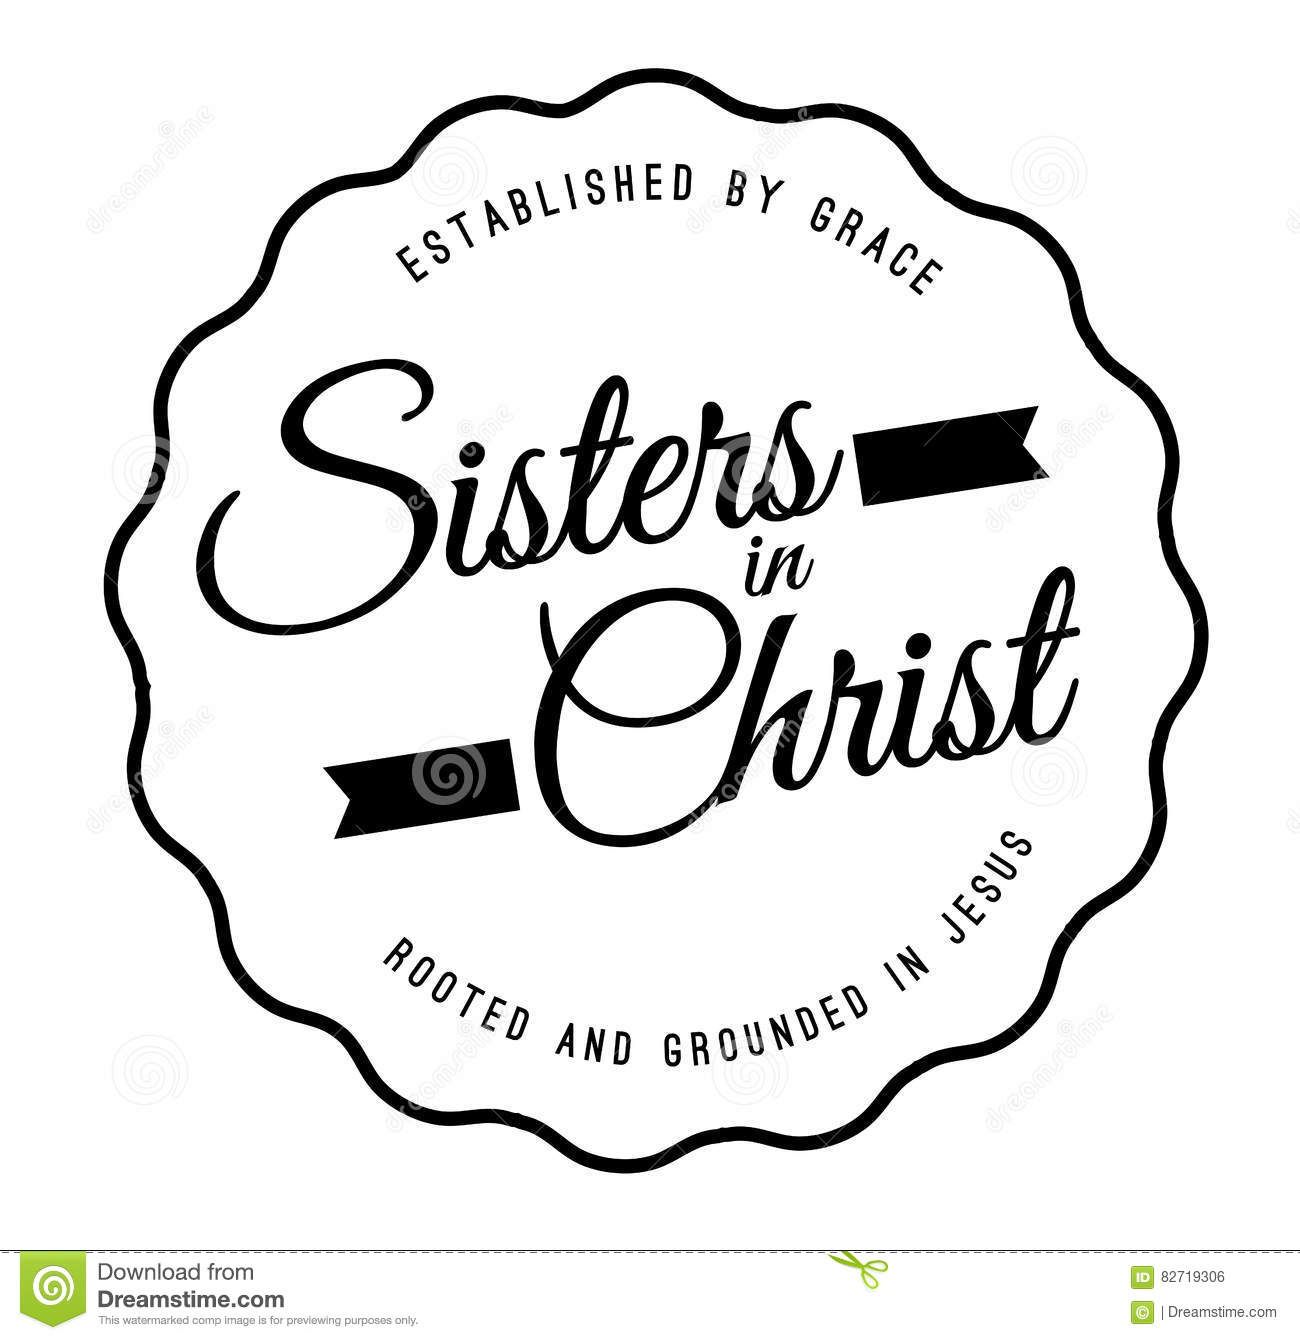 Image result for sisters in christ clipart.